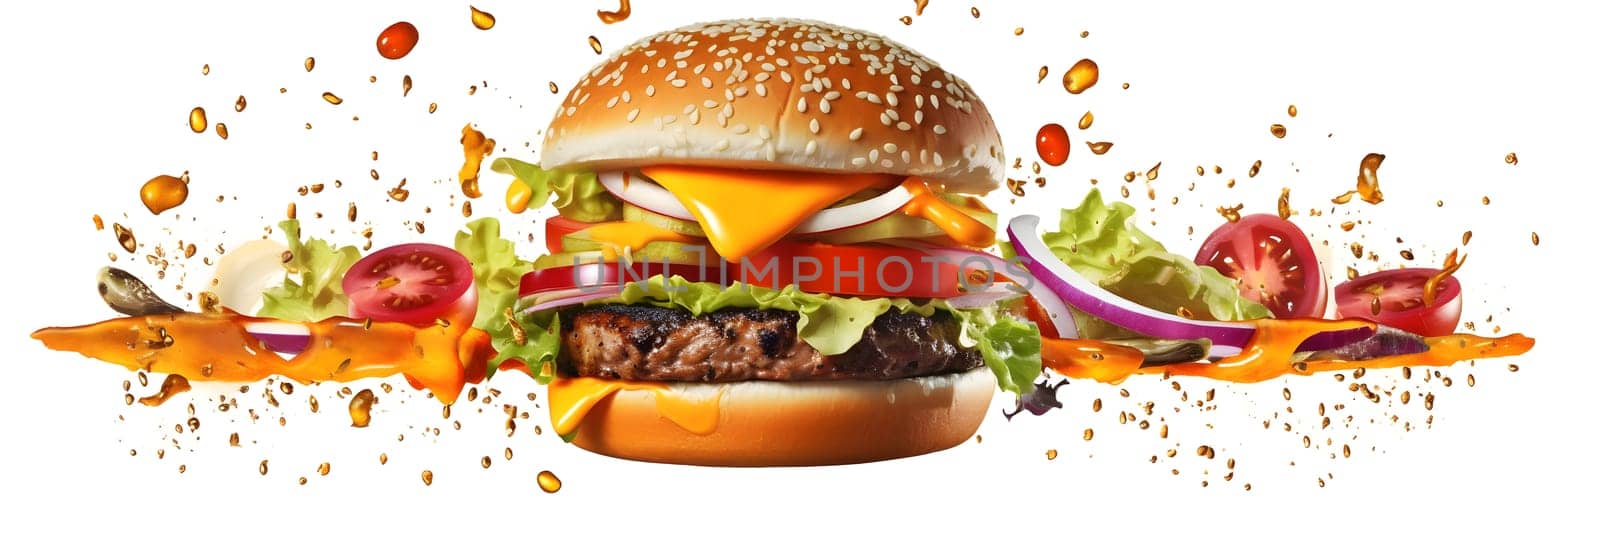 hamburger flying on white background, neural network generated photorealistic image by z1b